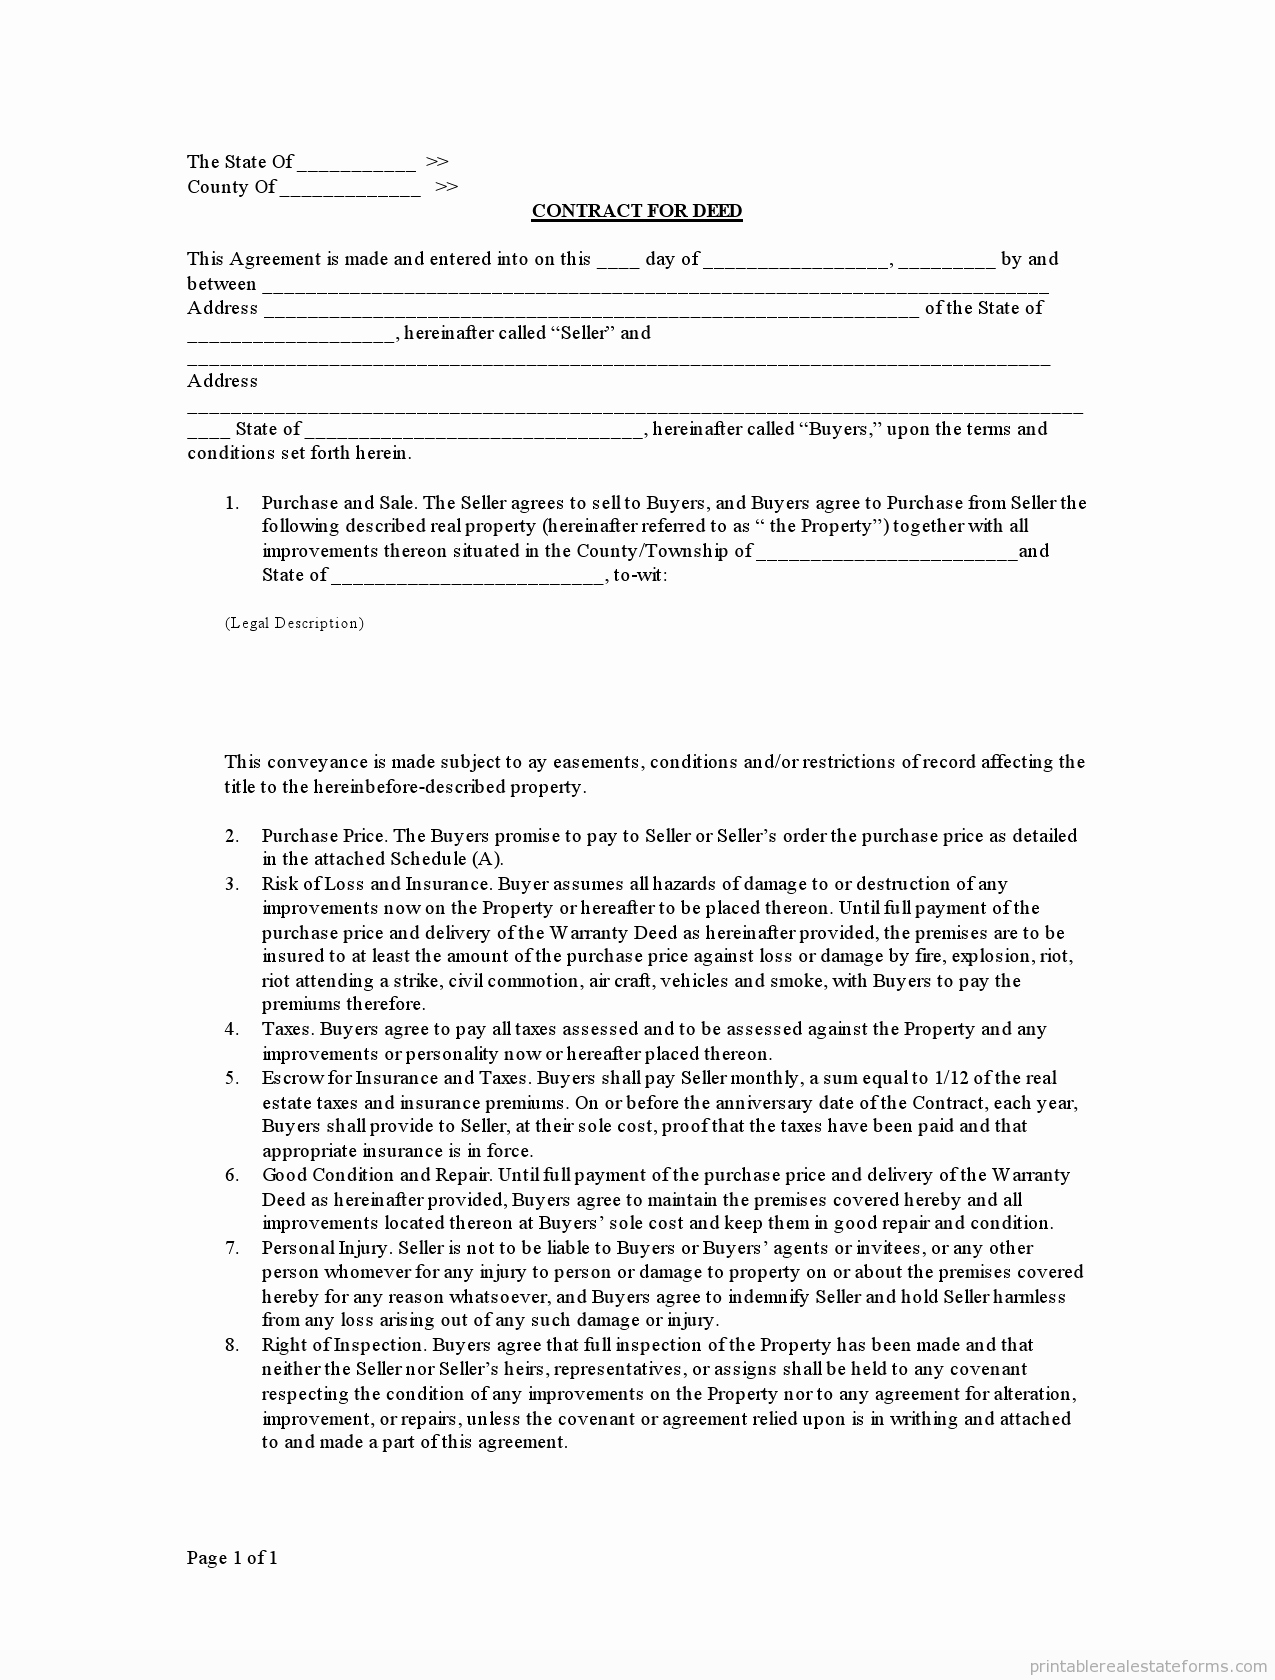 Free Real Estate Contract Unique Free Printable Contract for Deed form Basic Templates